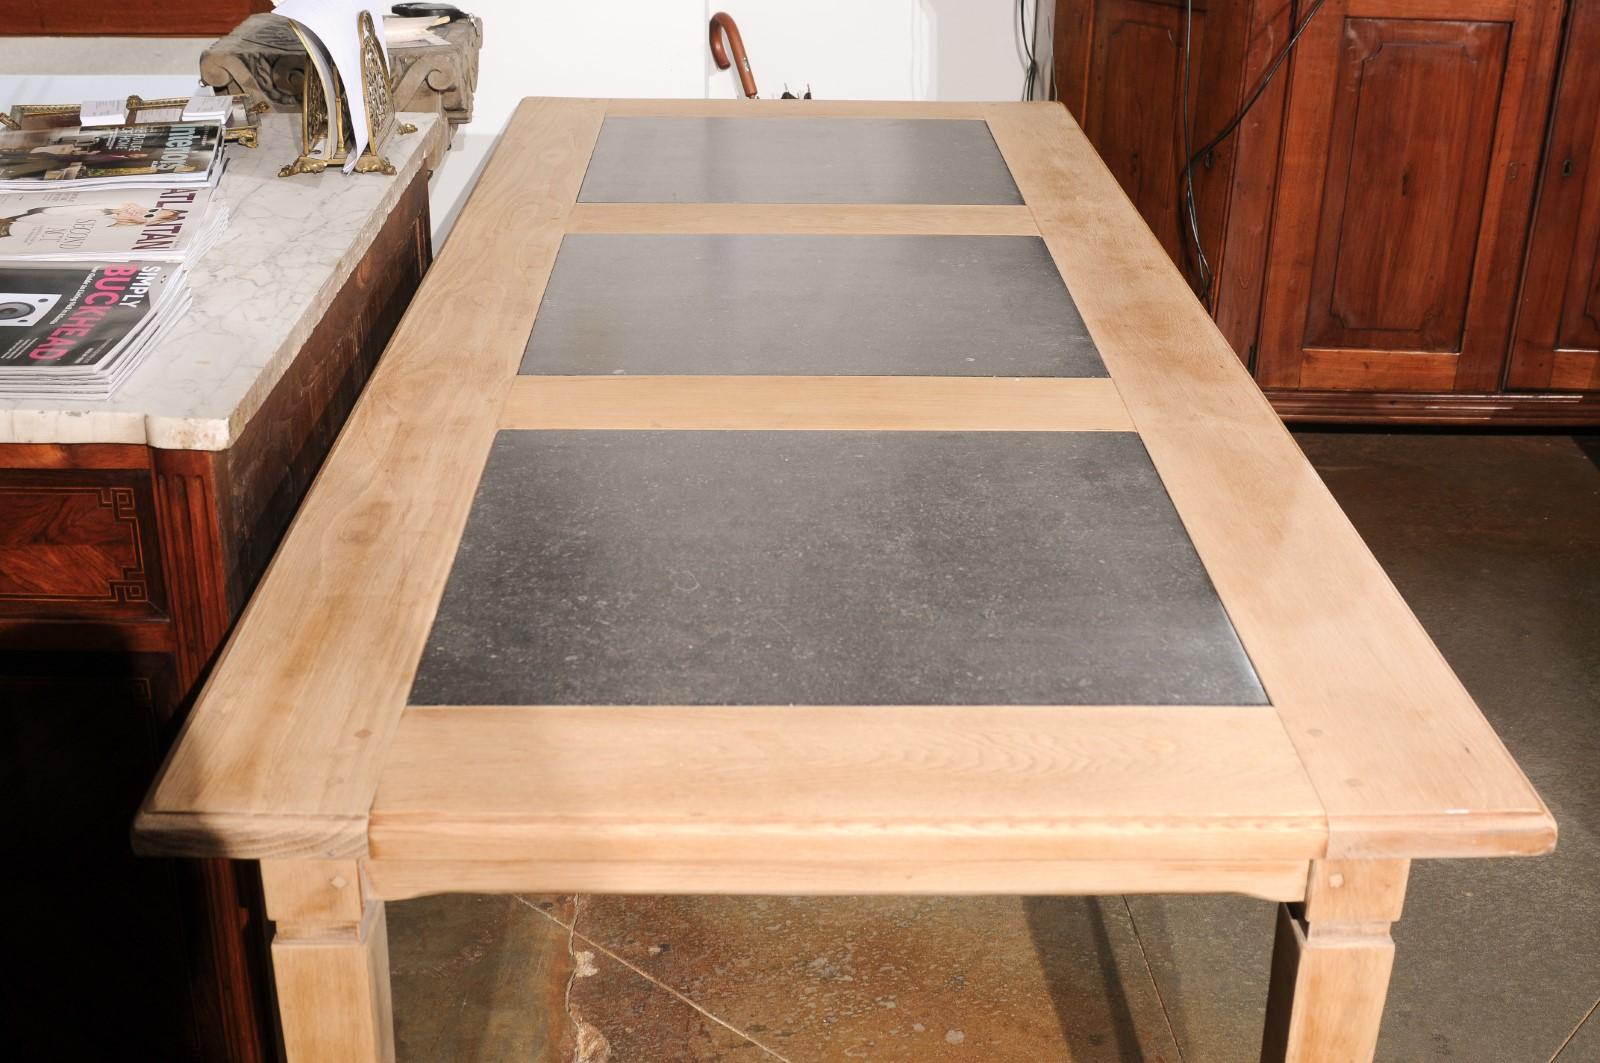 Southern French Midcentury Natural Oak Dining Table with Fossil Black Marble Top For Sale 4